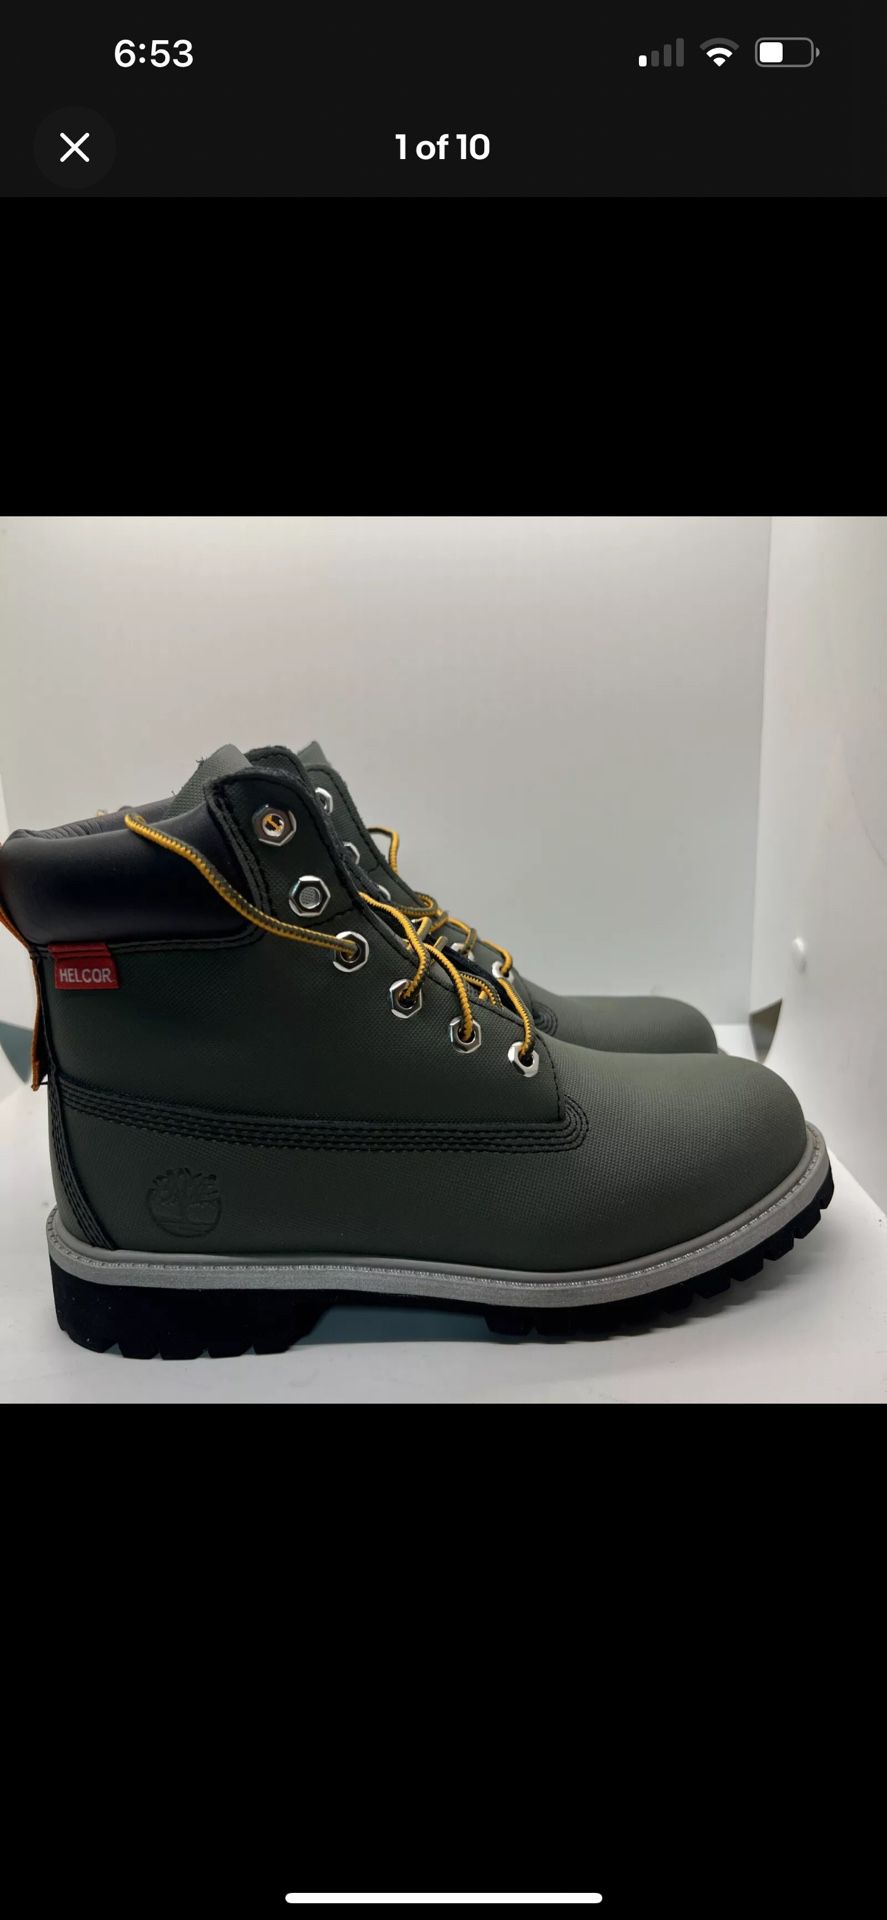 Timberland Premium 6 Inch Rubber Cup Helcor Leather Dark Green Boots Size us 5